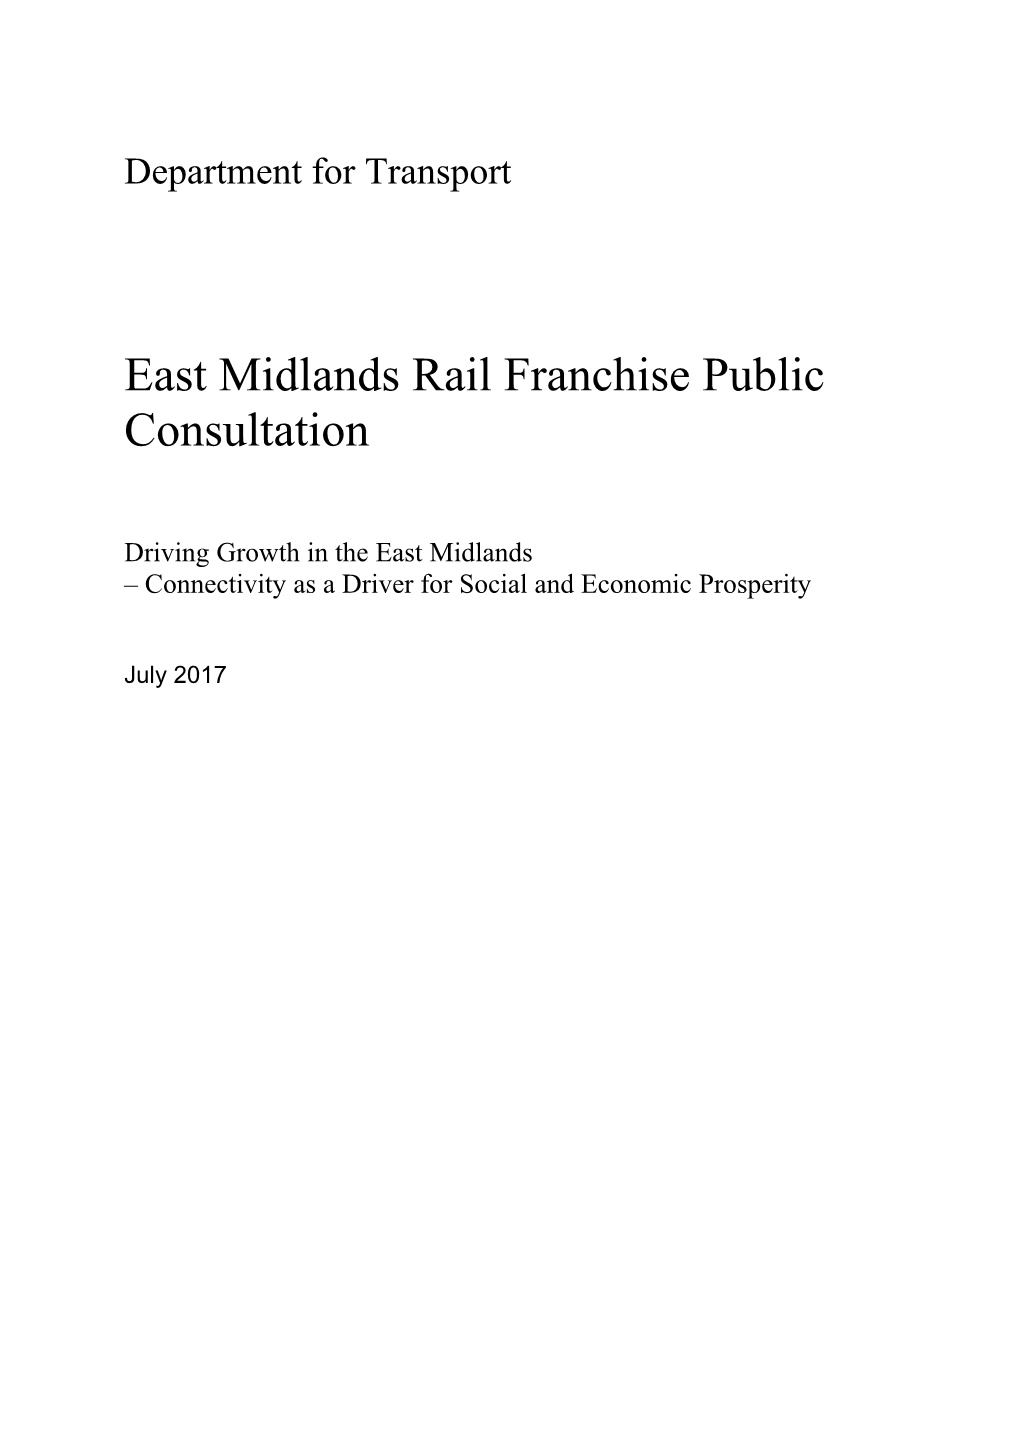 East Midlands Rail Franchise Public Consultation: Driving Growth in the East Midlands